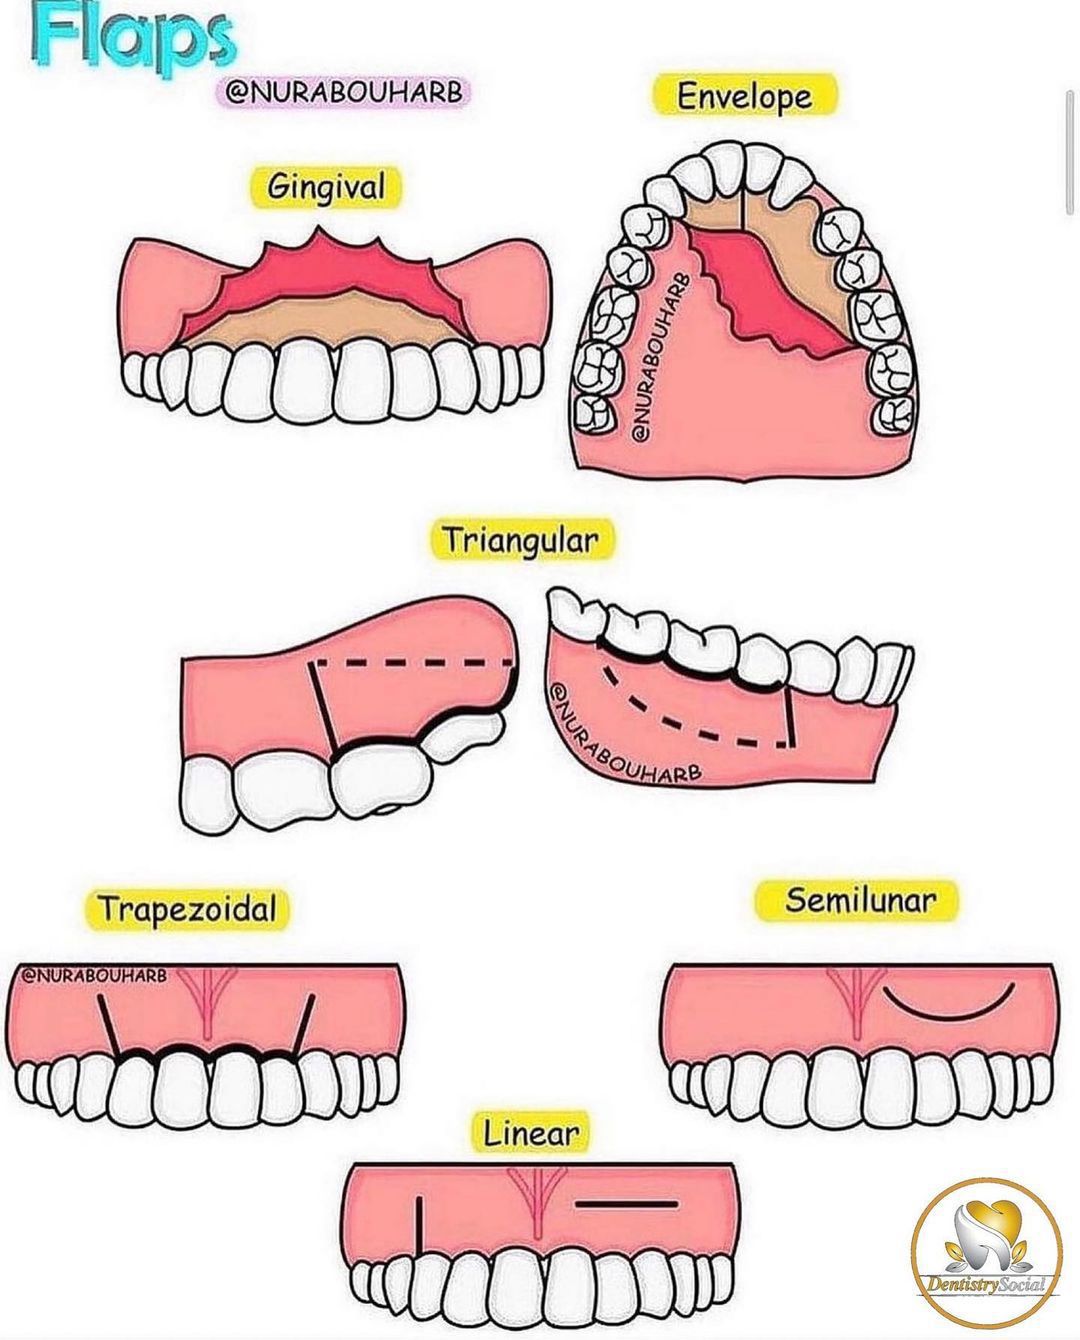 Types of flaps in oral surgery